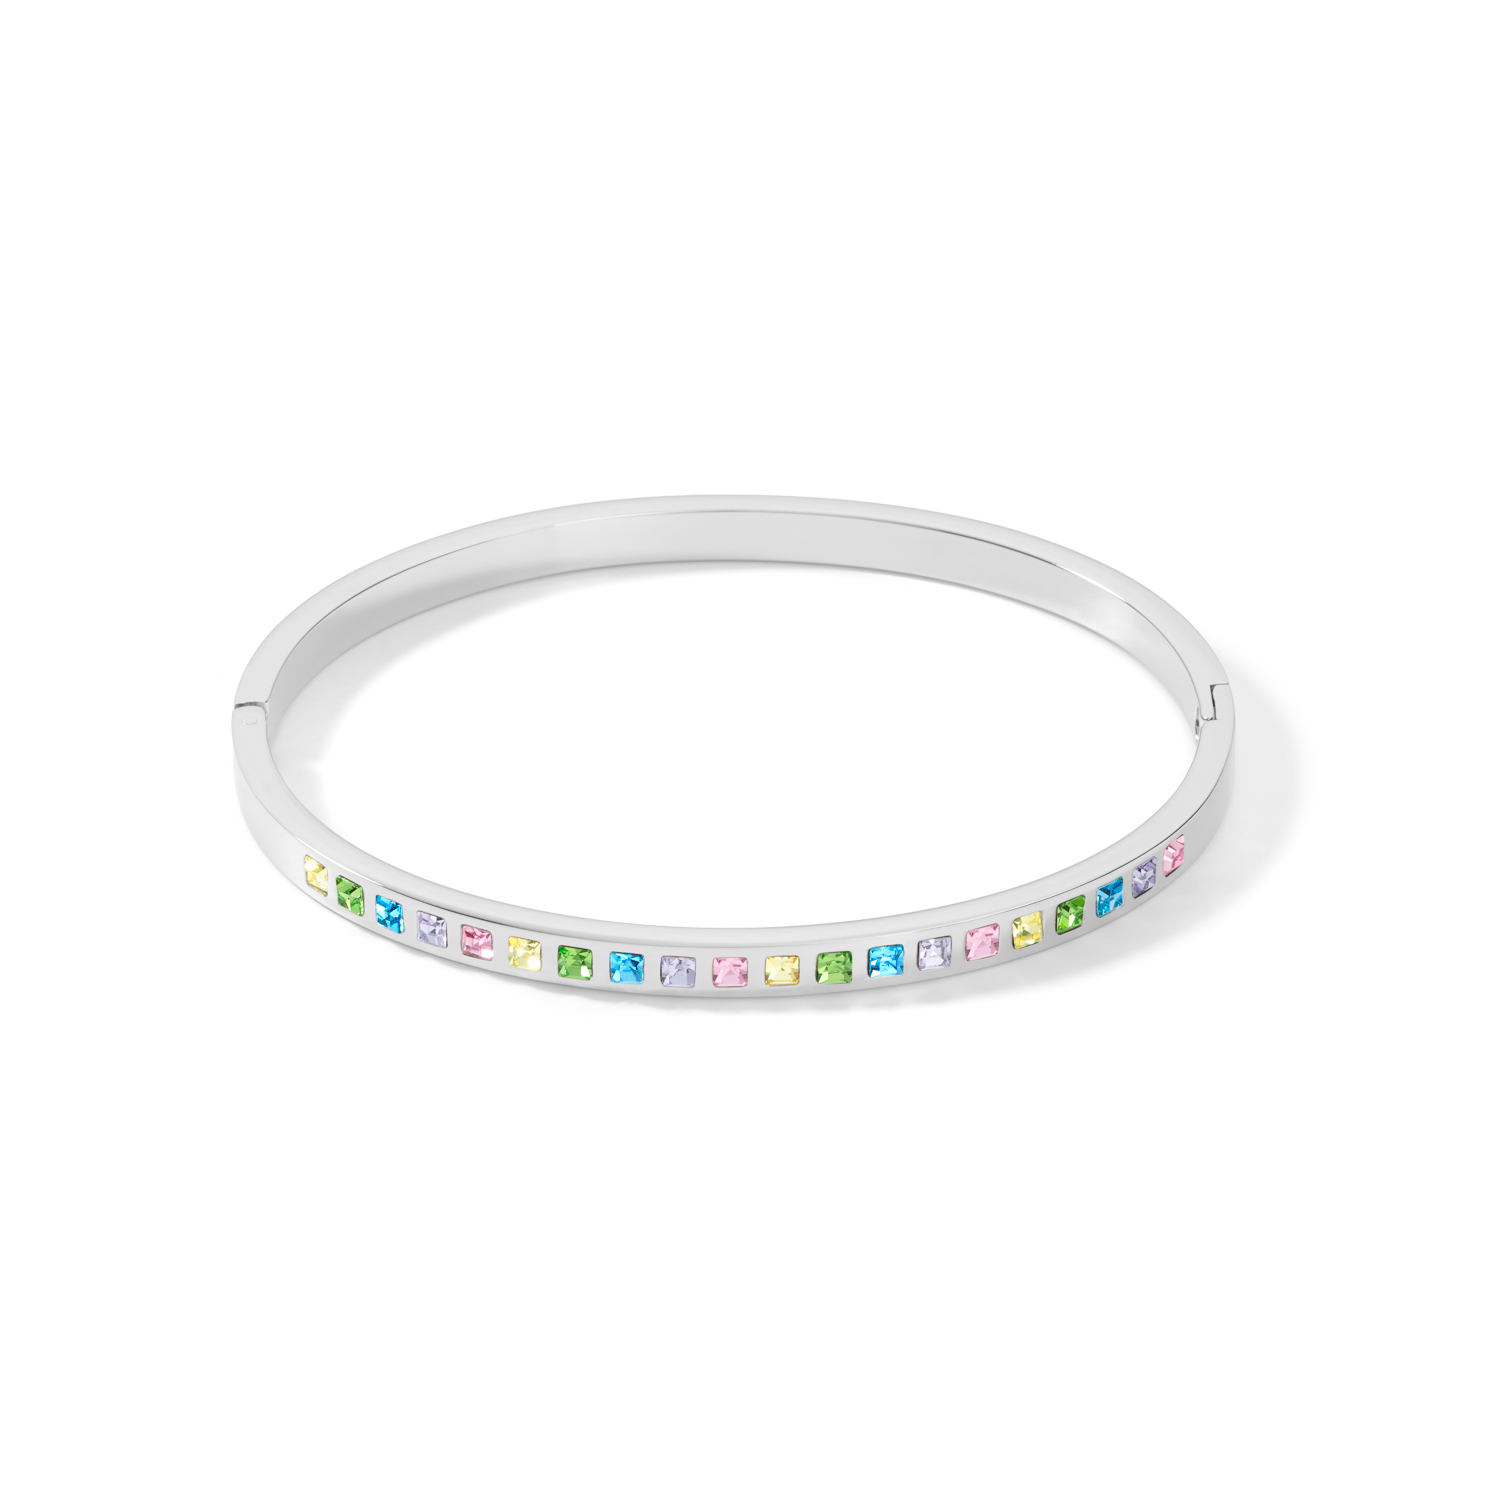 Bangle stainless steel silver & square crystals pavé multicolour pastel 19